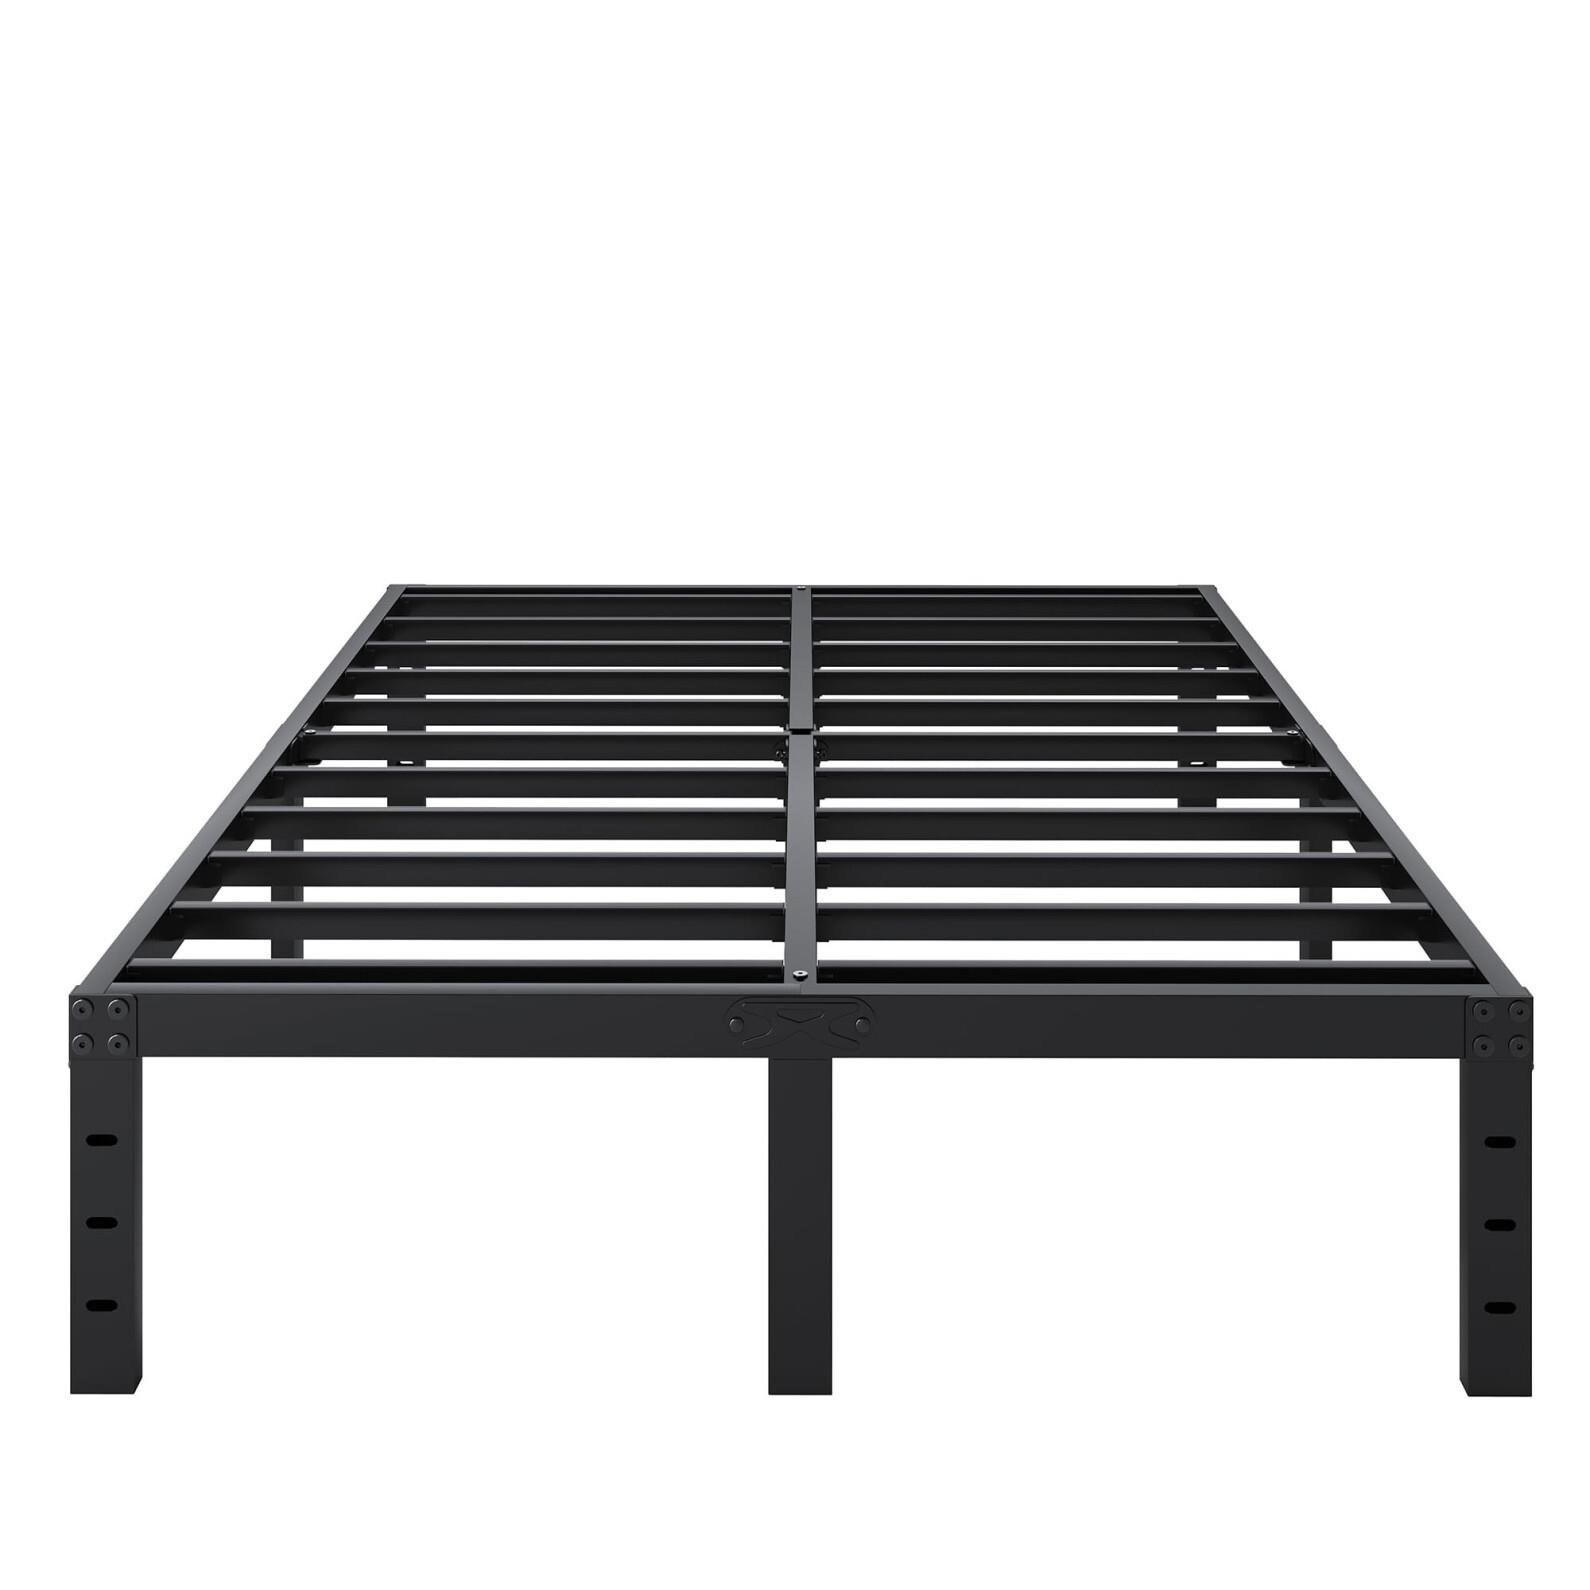 SHLAND Bed Frame Queen Size, 14 Inch Heavy Duty M